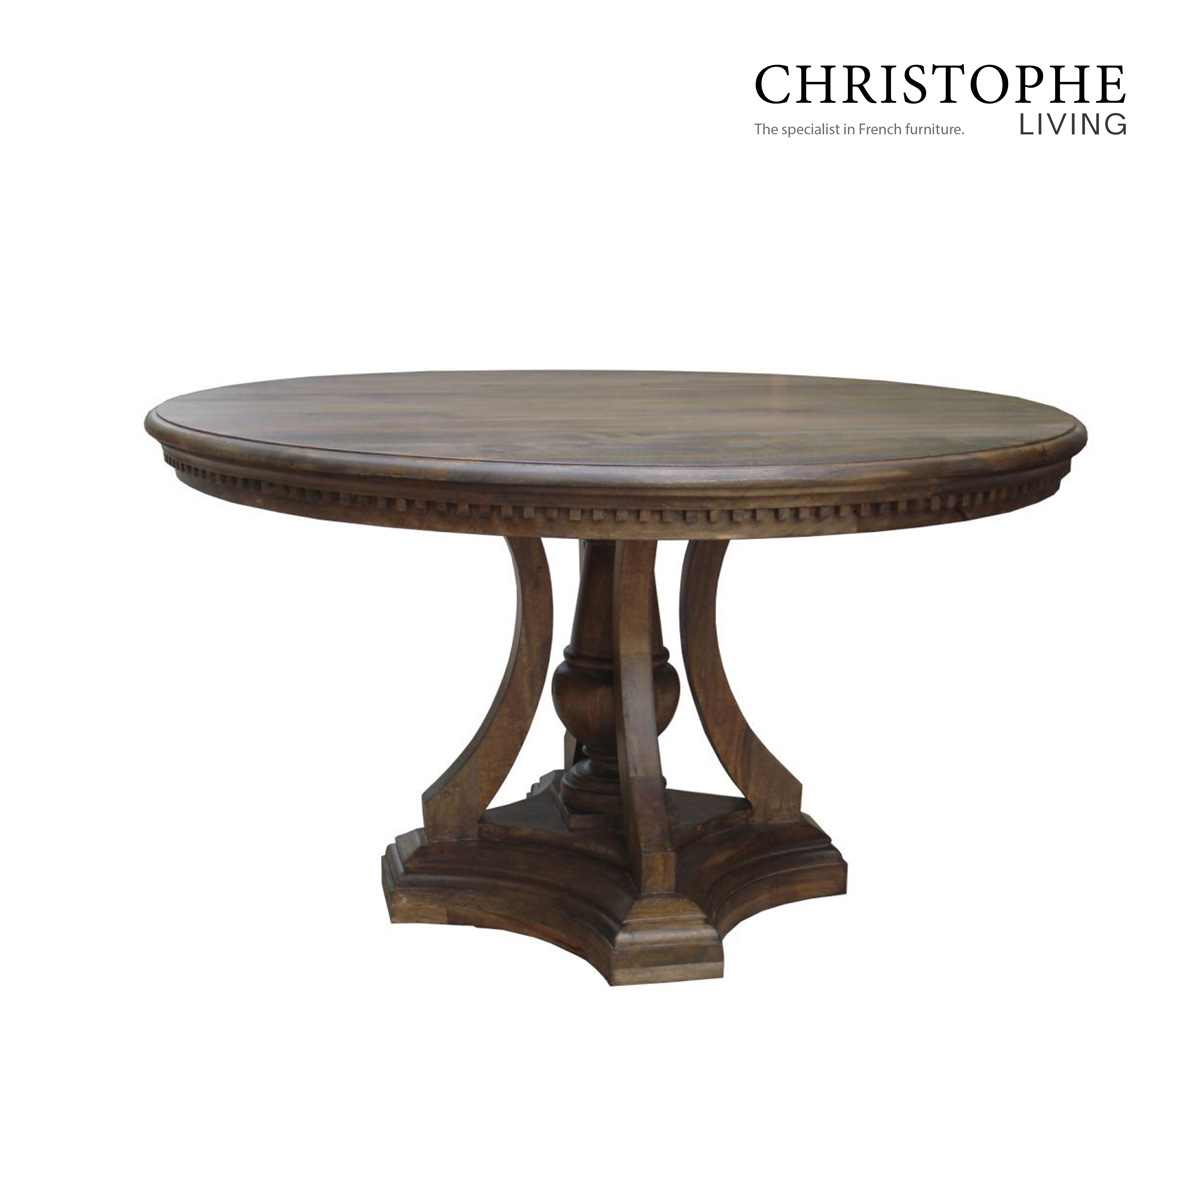 Valentino French Provincial Round Dining Table 140cm - Light Walnut Stain Solid Timber